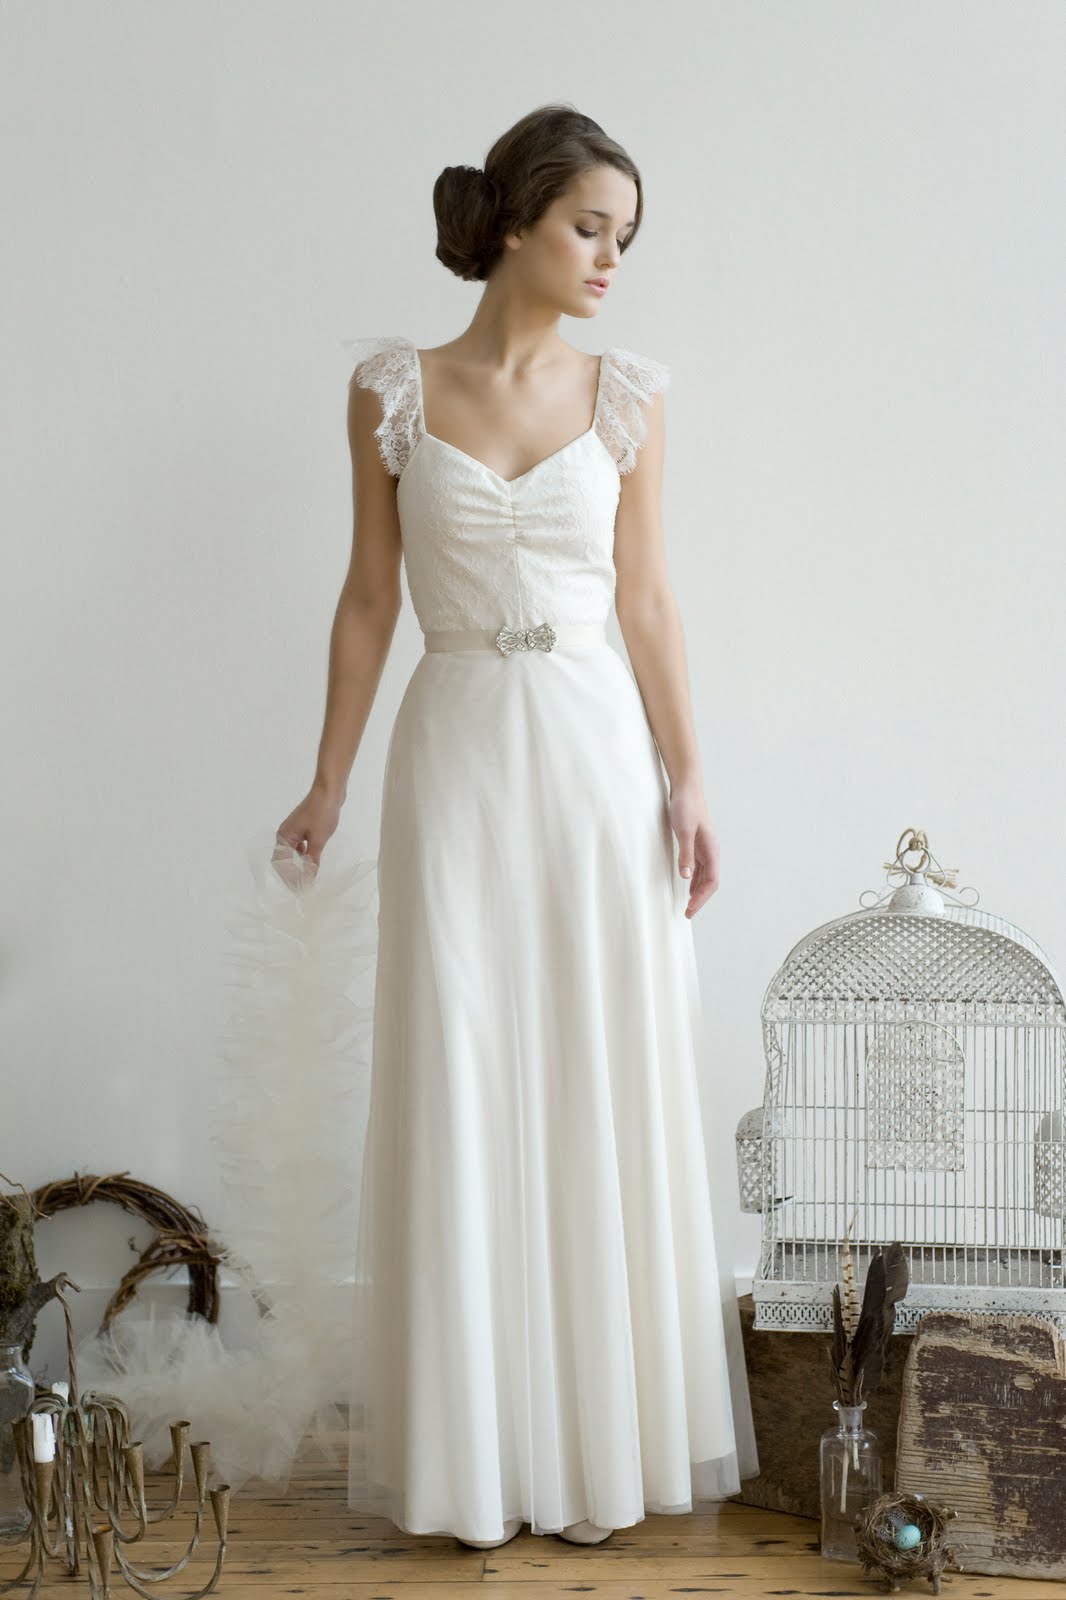 wedding dresses with short sleeves and lace Wedding Dress Swoonage- James, no peeking!